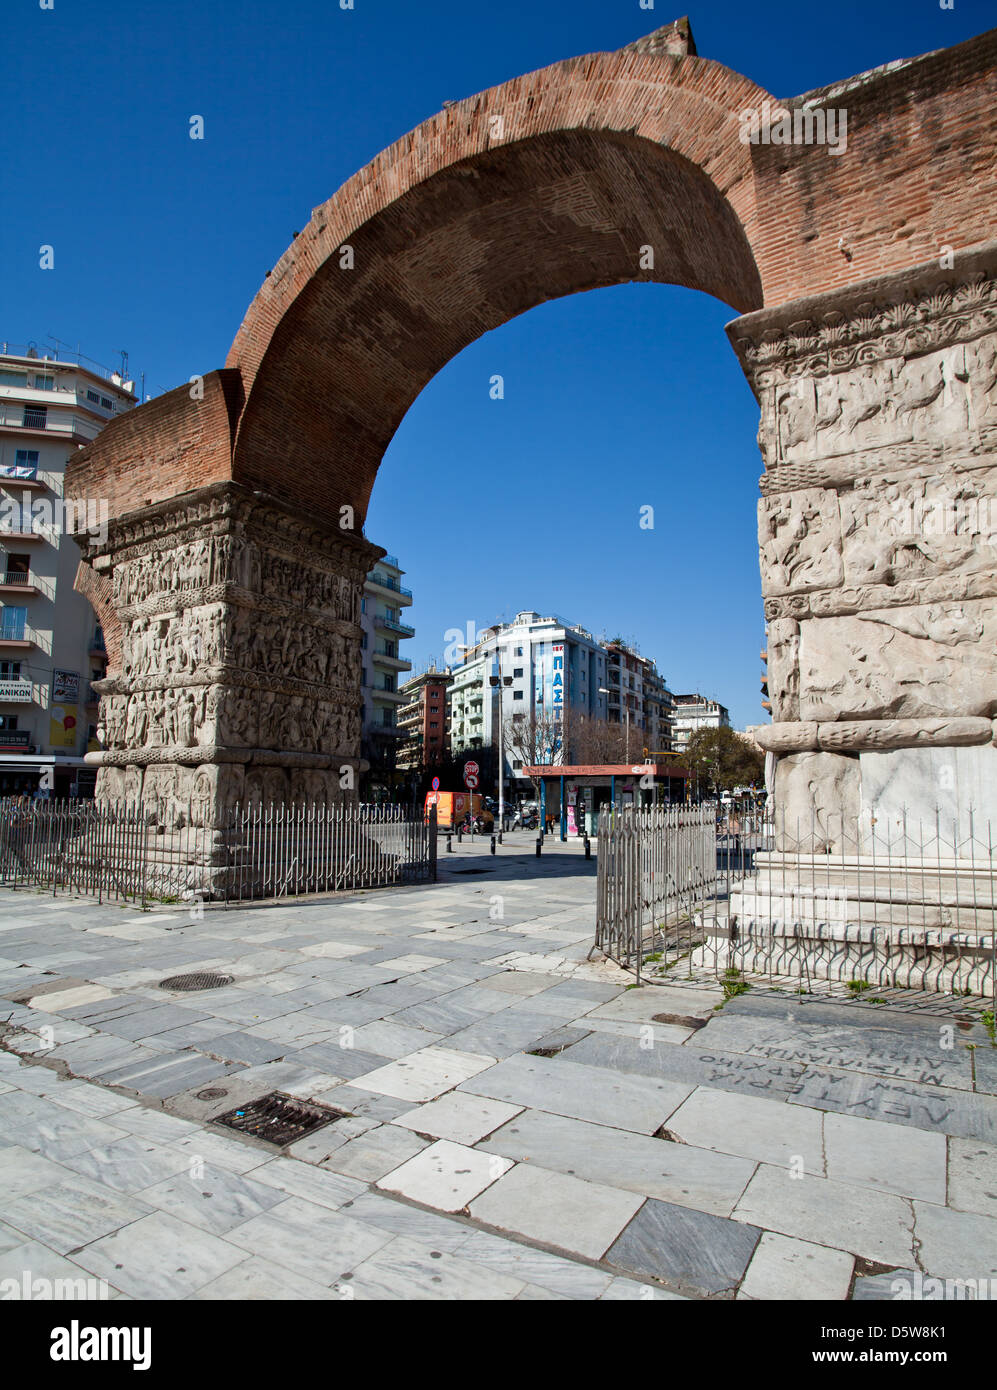 The Arch of Galerius and the Rotunda in the city of Thessaloniki in the Region of Central Macedonia, Greece. Stock Photo